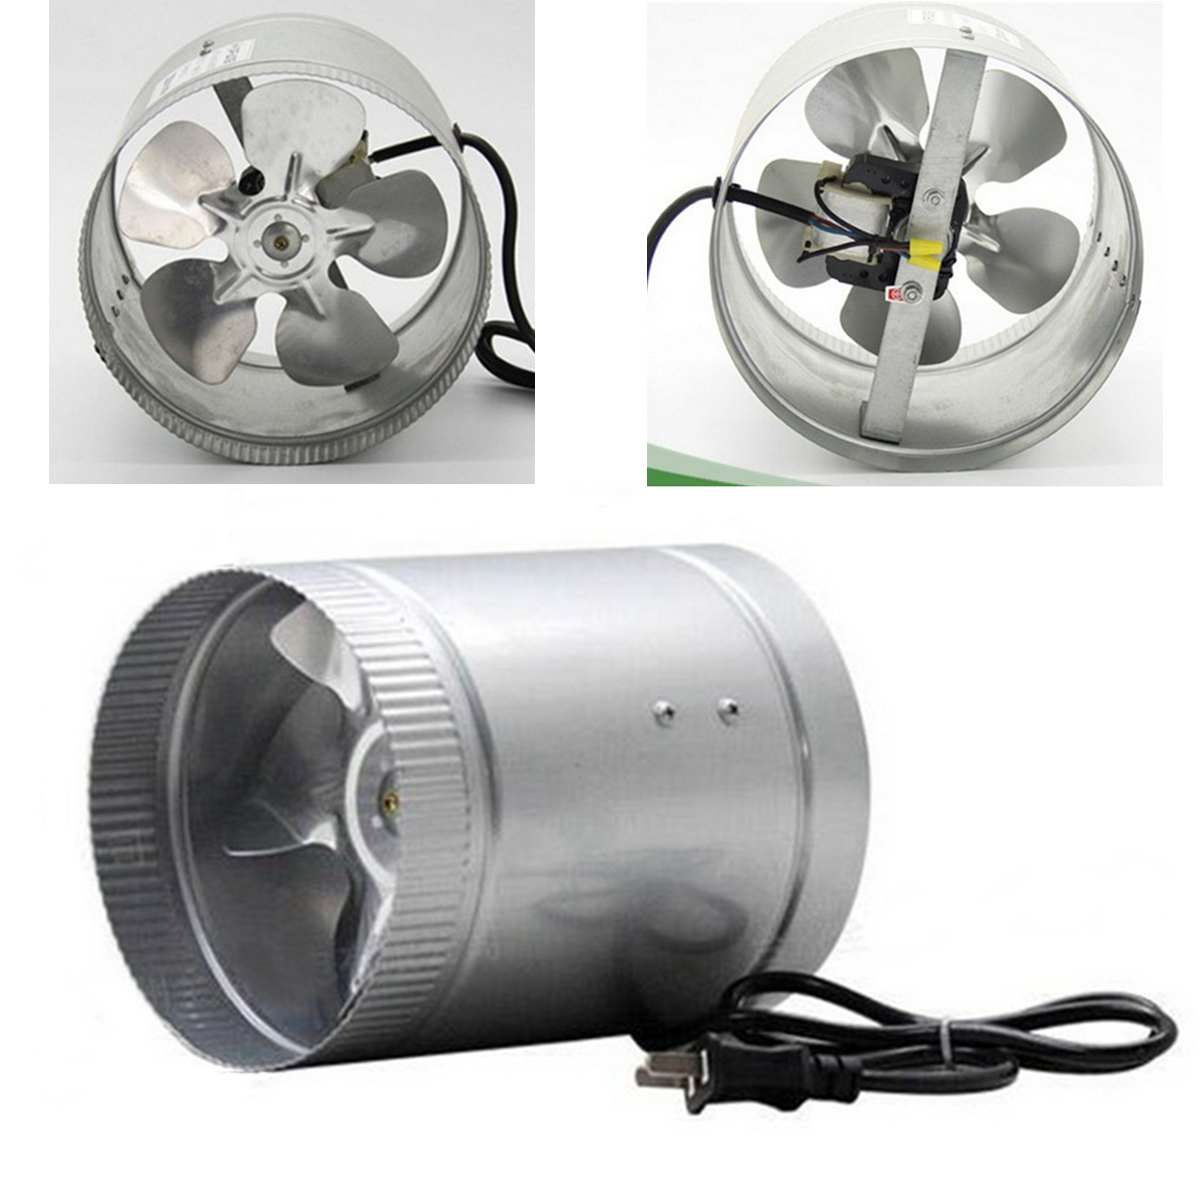 Us 2419 46 Off4 100cfm Air Duct Fan Low Noise Inline Booster Fan For Kitchen Bathroom For Grow Room Ventilation 12w 2600rpmexhaust Fans throughout proportions 1200 X 1200